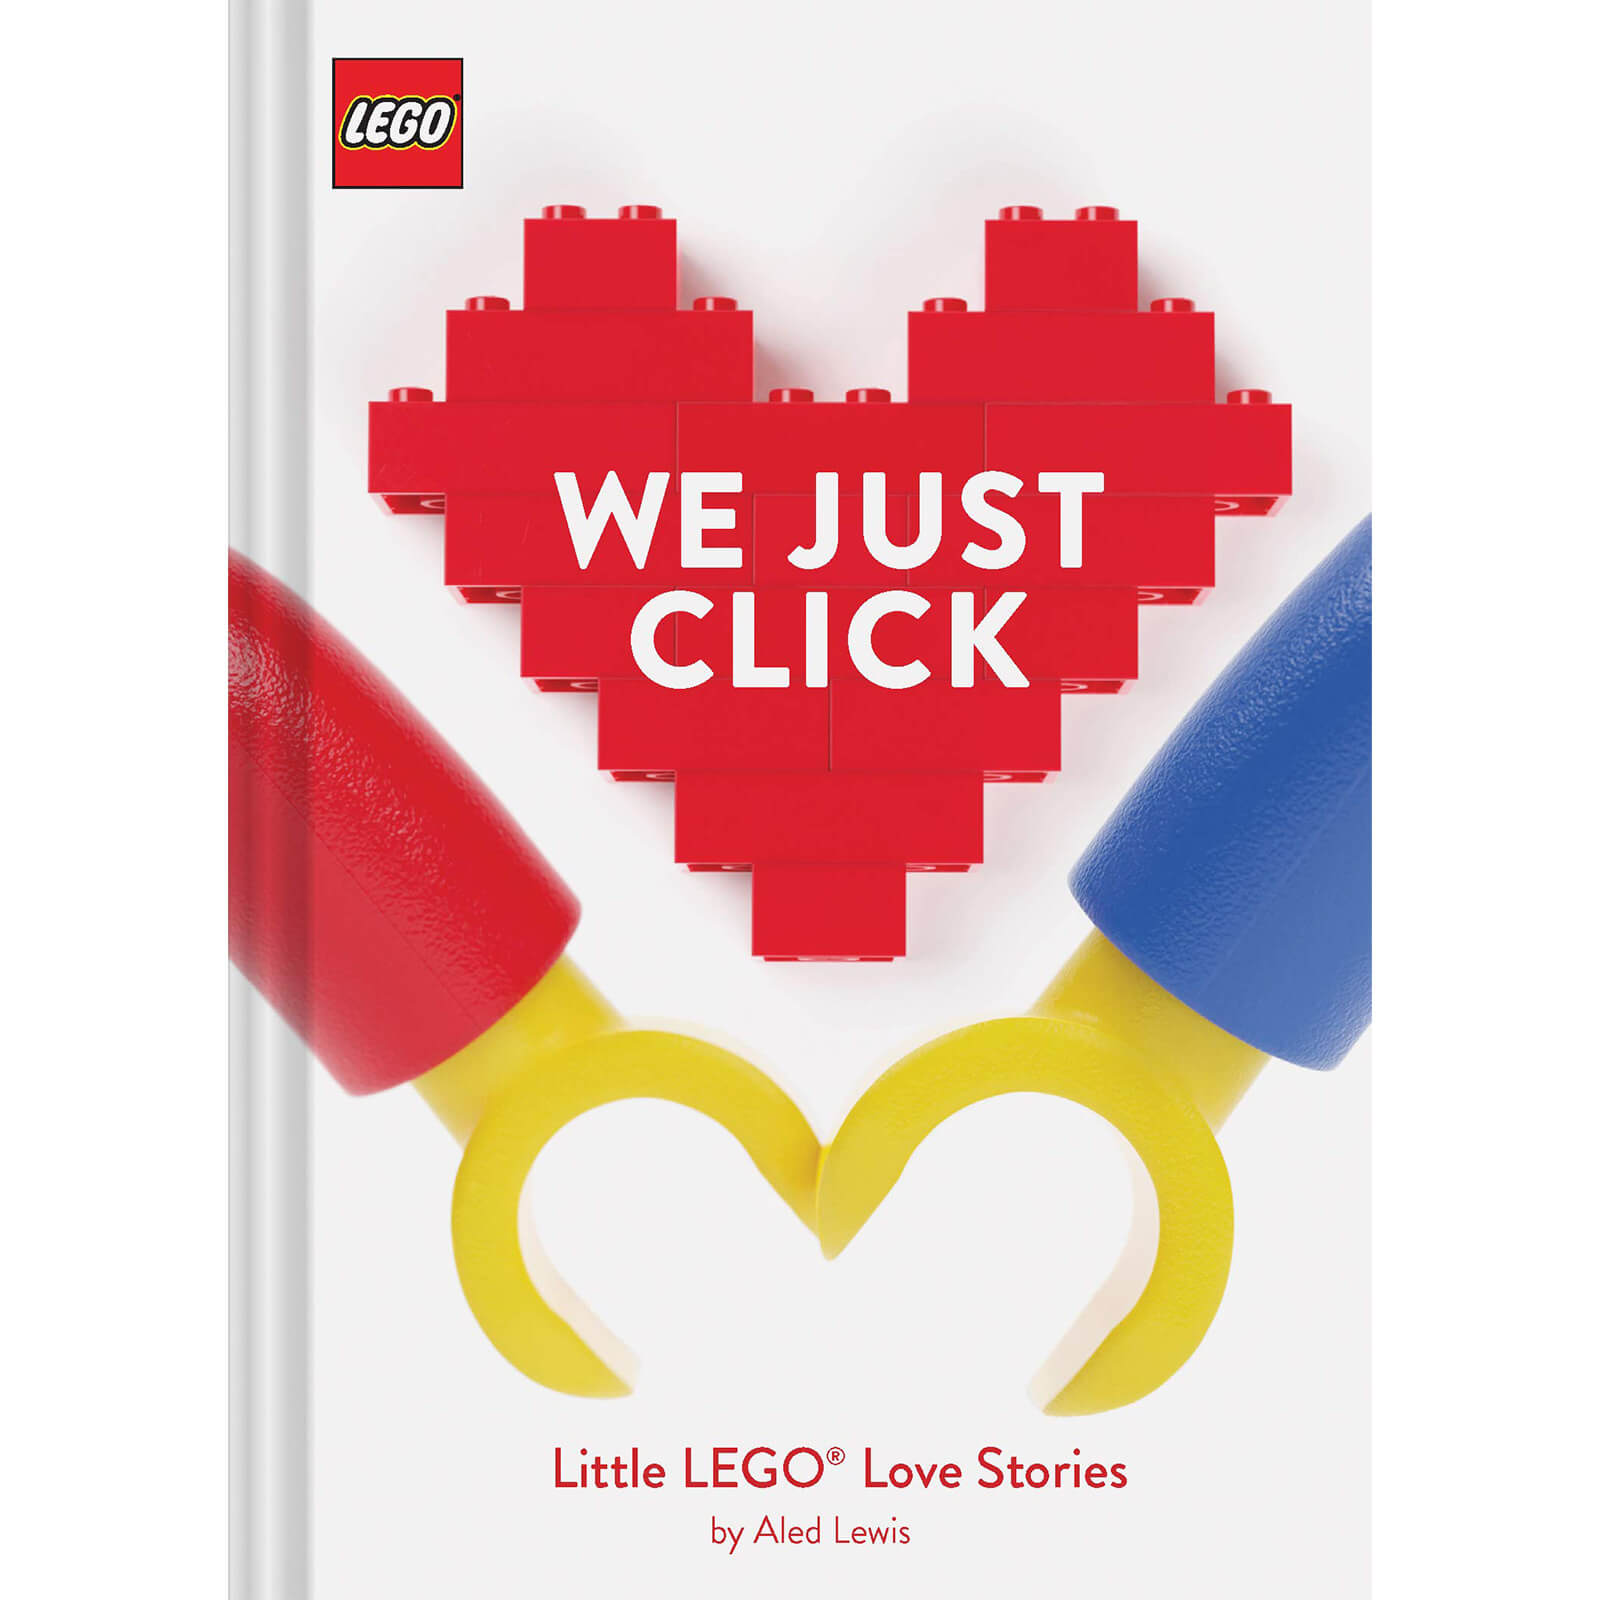 Abrams & Chronicles LEGO: We Just Click Book